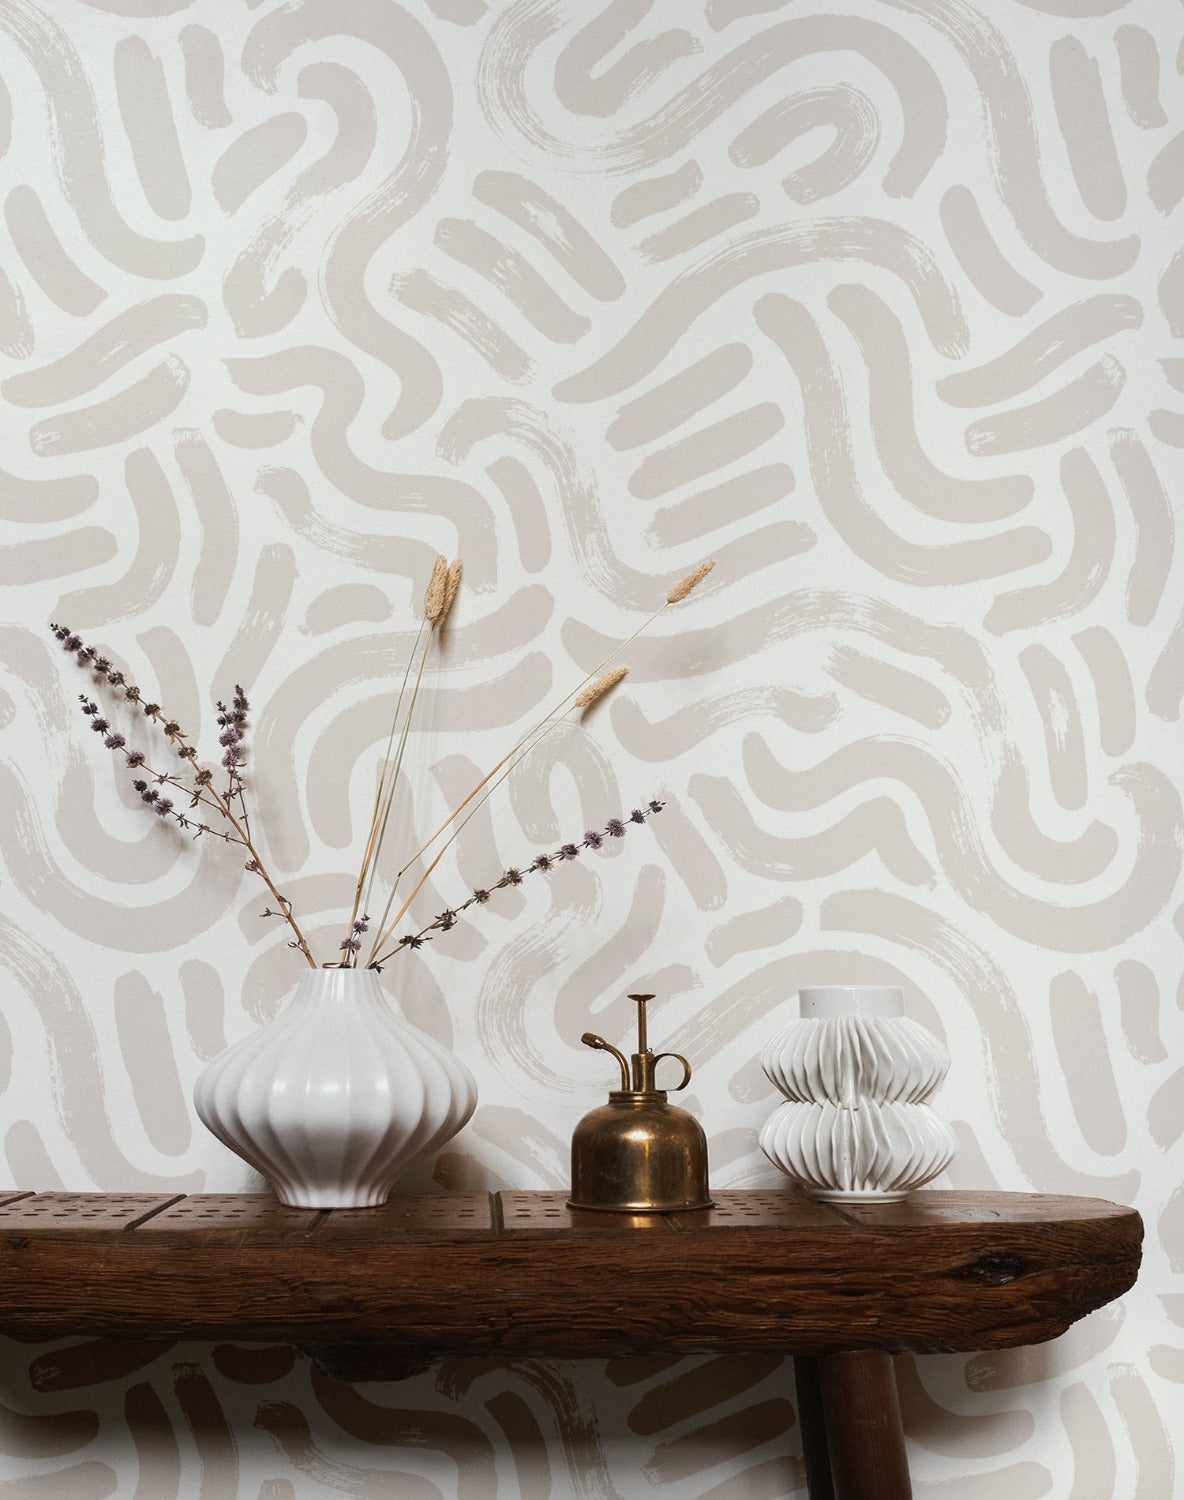 An interior setup showcasing the Painted Abstract Wallpaper applied to a wall. The abstract, free-form hazelnut lines weave across a white backdrop, complementing the rustic wooden console table in the foreground. On the table, a white ribbed vase with dried lavender, a vintage brass mister, and a sculptural white candle holder add to the organic aesthetic of the scene.